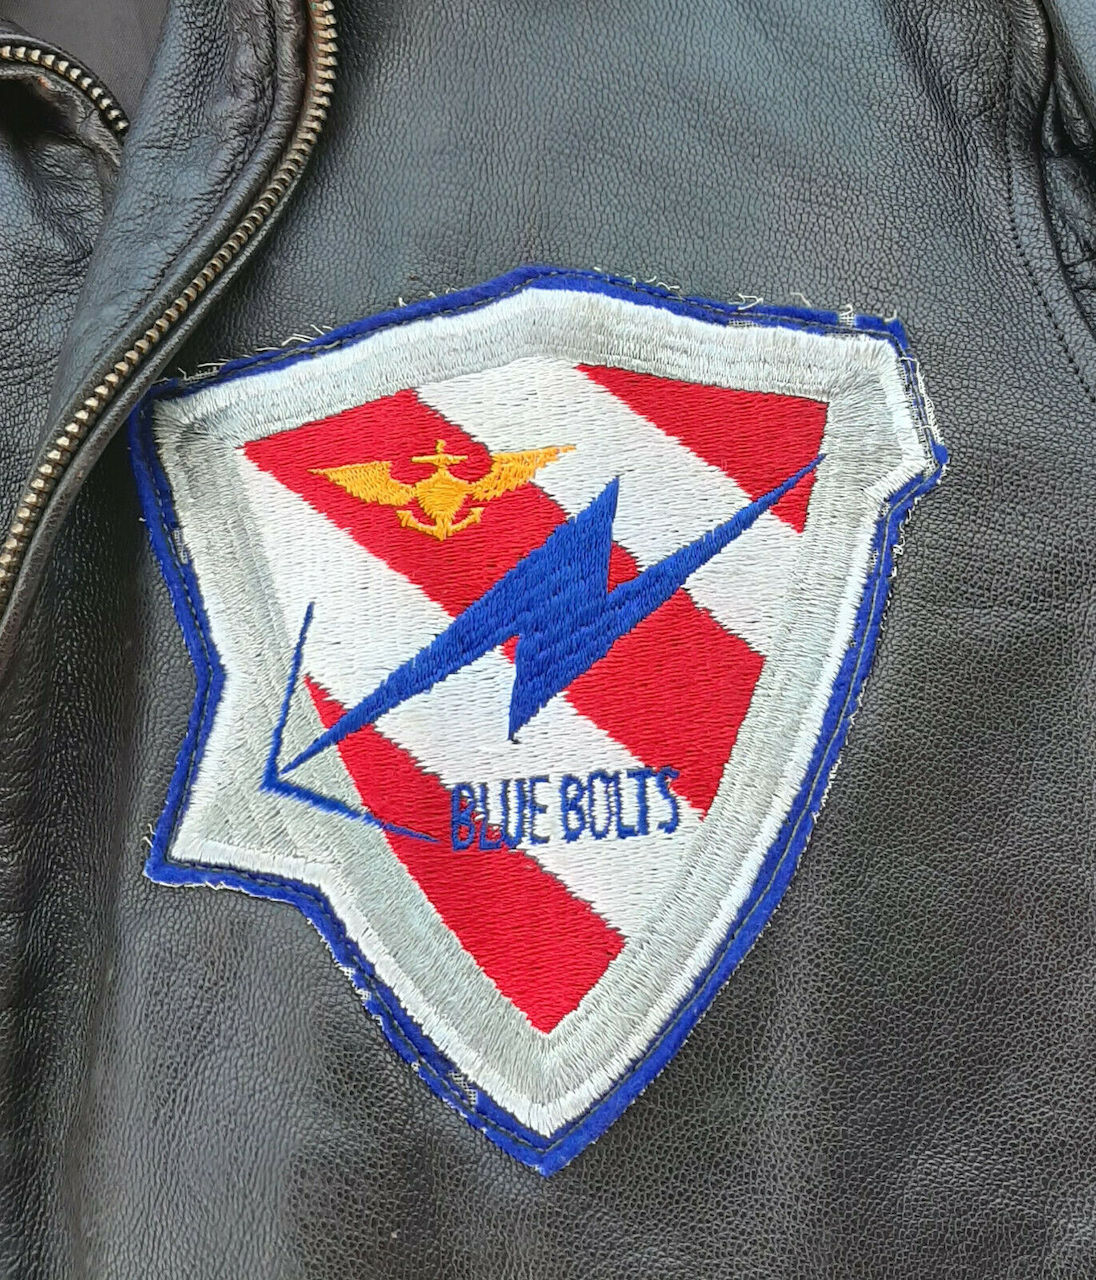 Korean war B-G INC G-1 with CAG-11 patch | Vintage Leather Jackets Forum